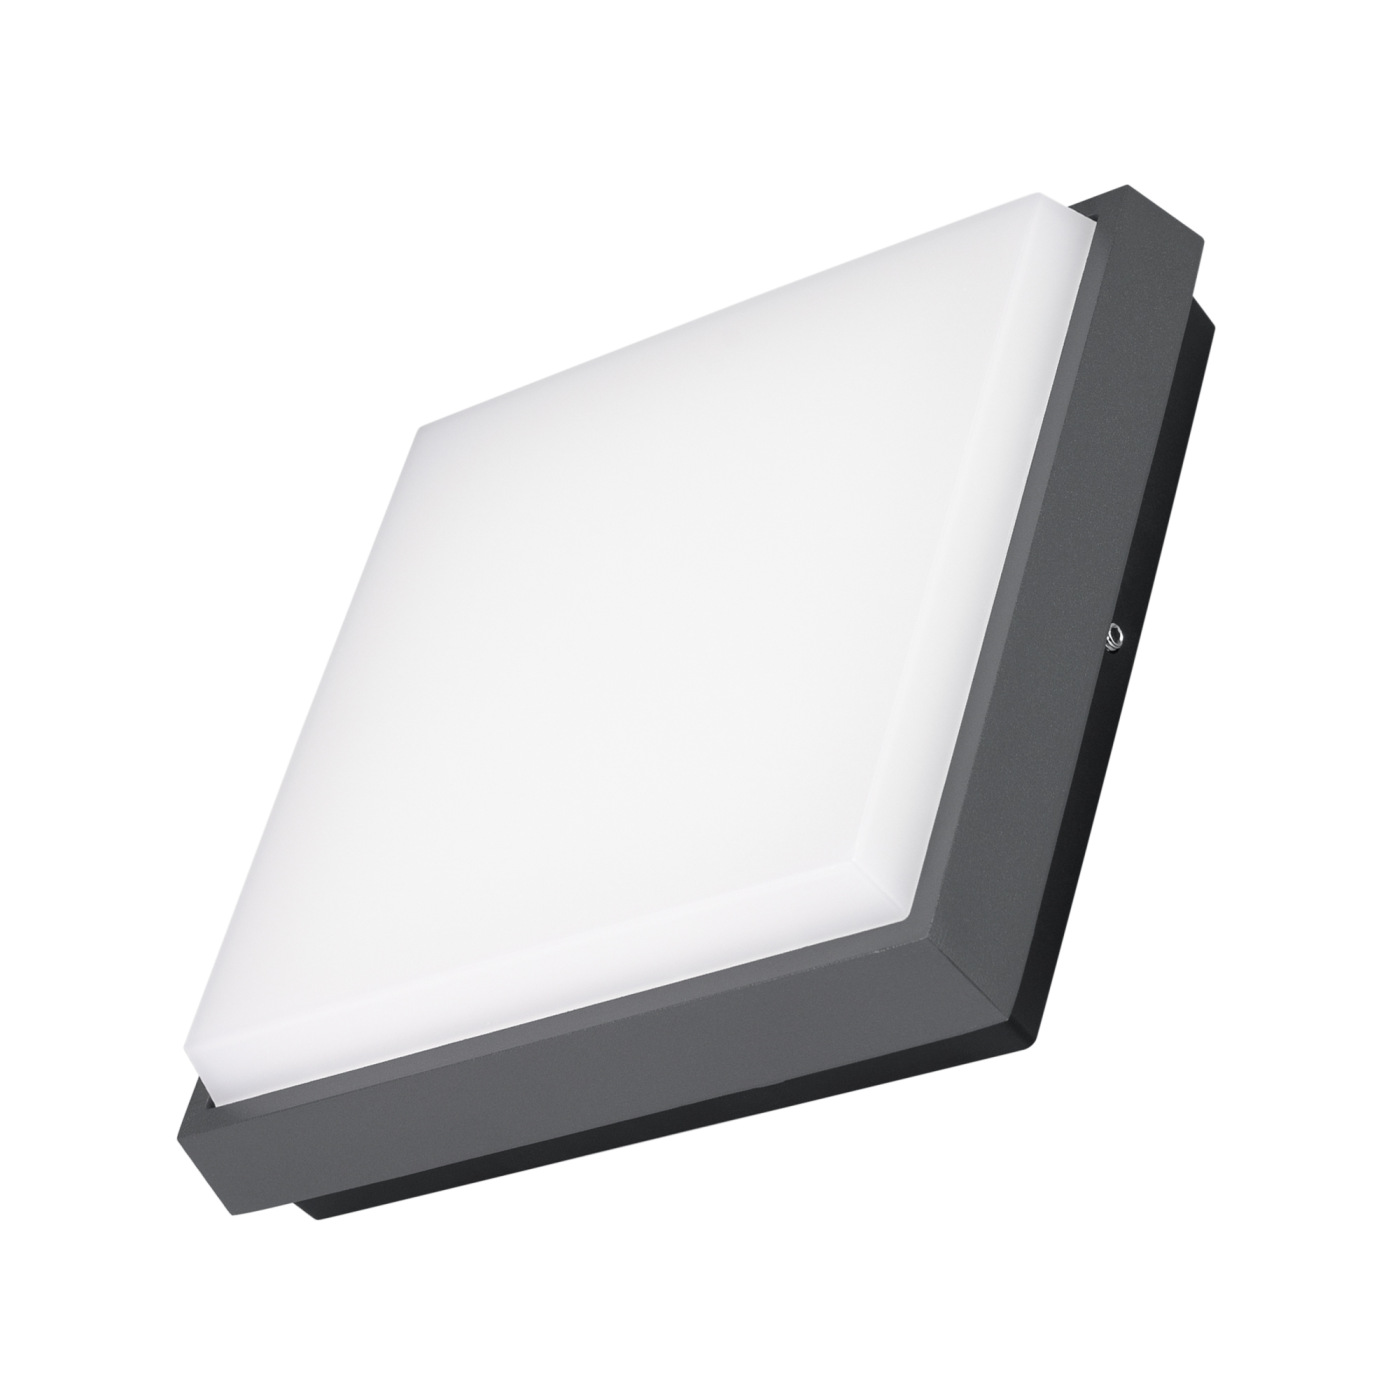 Светильник LGD-AREA-S175x175-10W Warm3000 (GR, 110 deg, 230V) (Arlight, IP54 Металл, 3 года) sculpfun s30 series engraving area expansion kit for s30 s30 pro s30 pro max 950x400mm v slot aluminum shaft directly installed